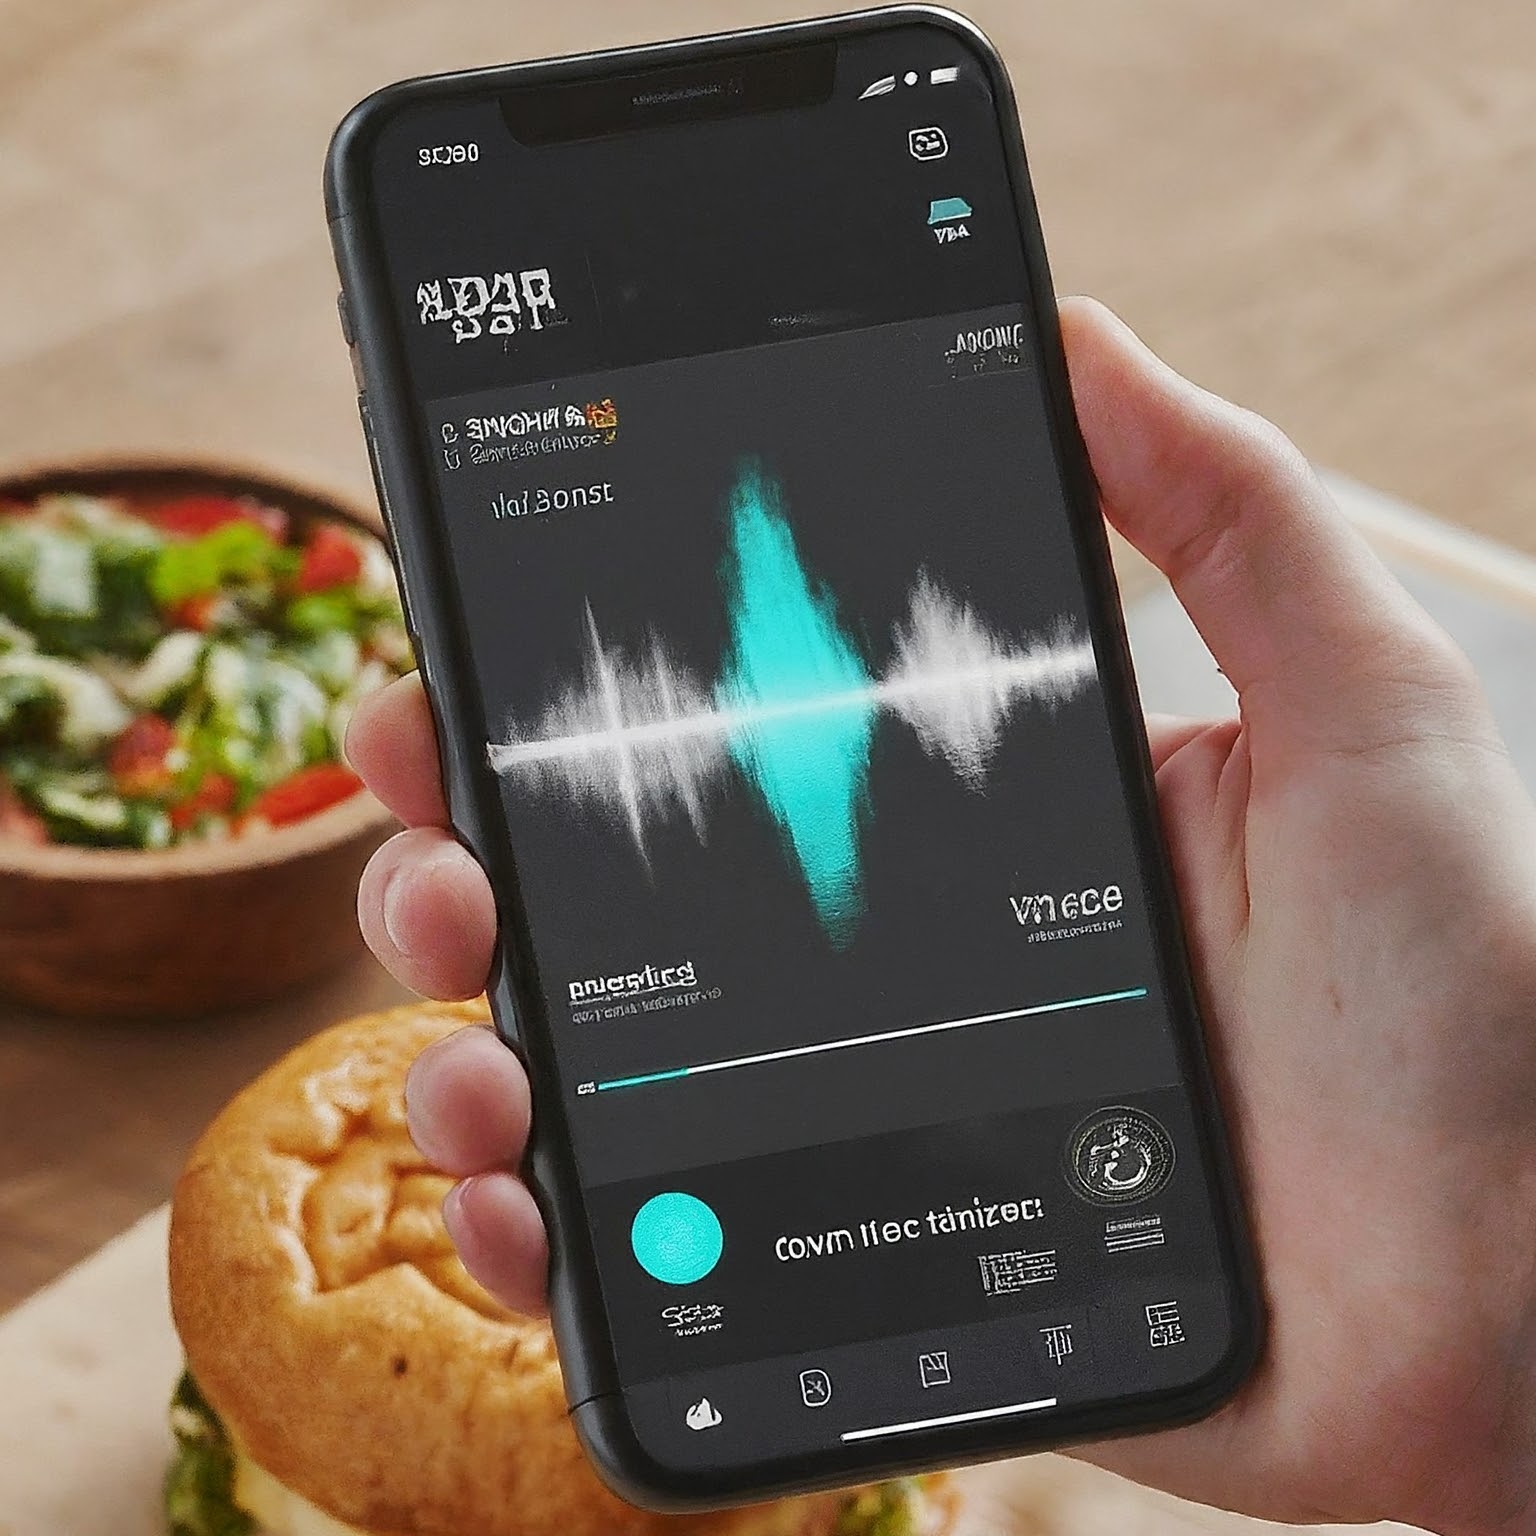 SoundHound's Big Bite: AI Voice Ordering Now on the Menu - Revolutionizing the Restaurant Experience